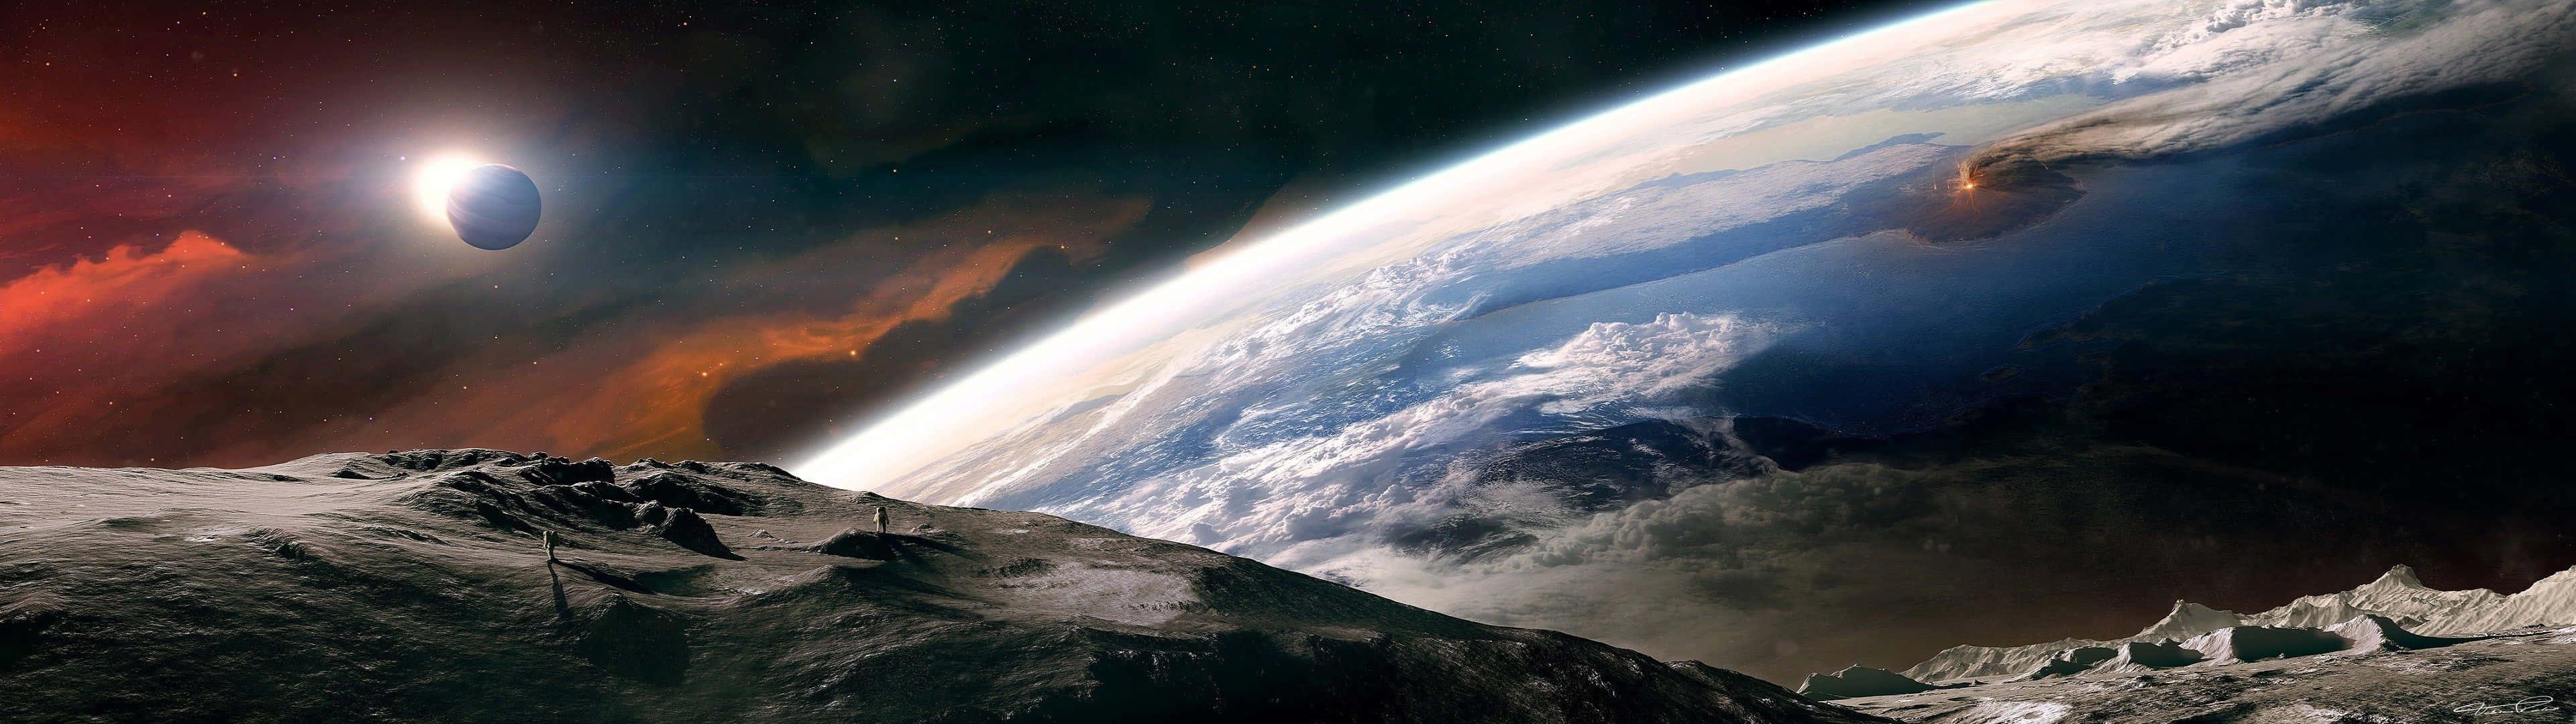 Experience The Beauty Of Space In Breathtaking Full HD